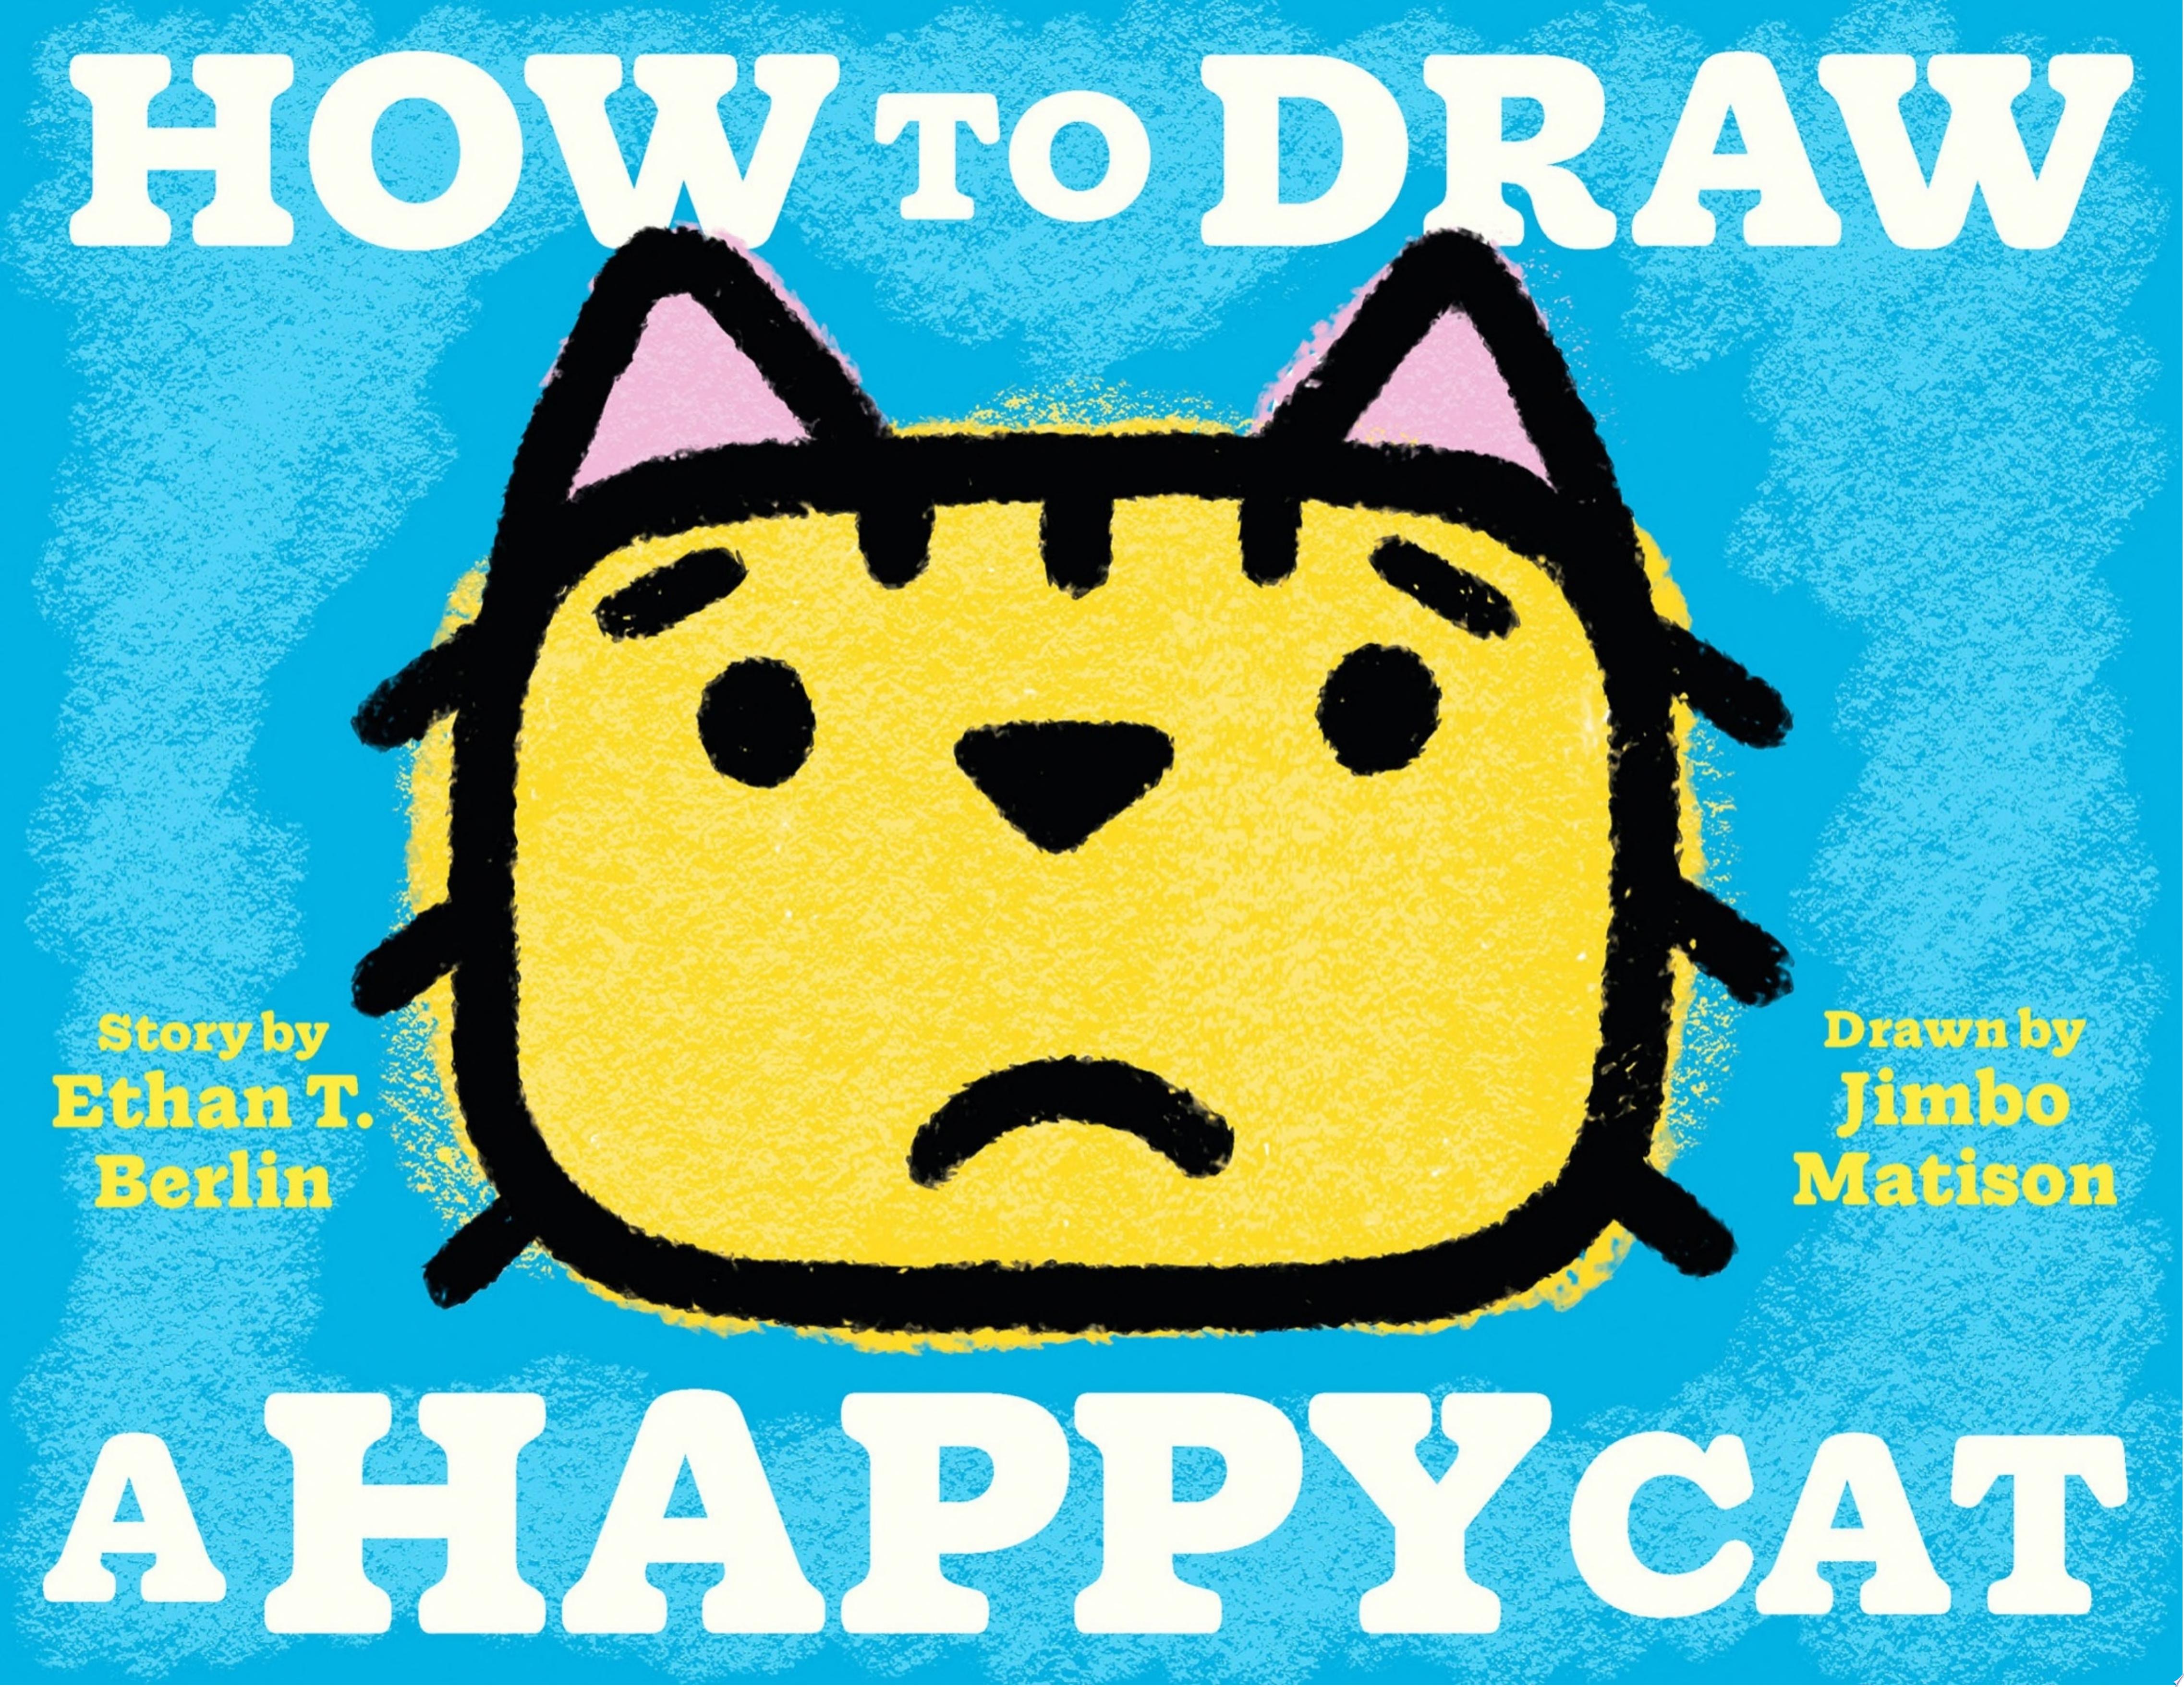 Image for "How to Draw a Happy Cat"